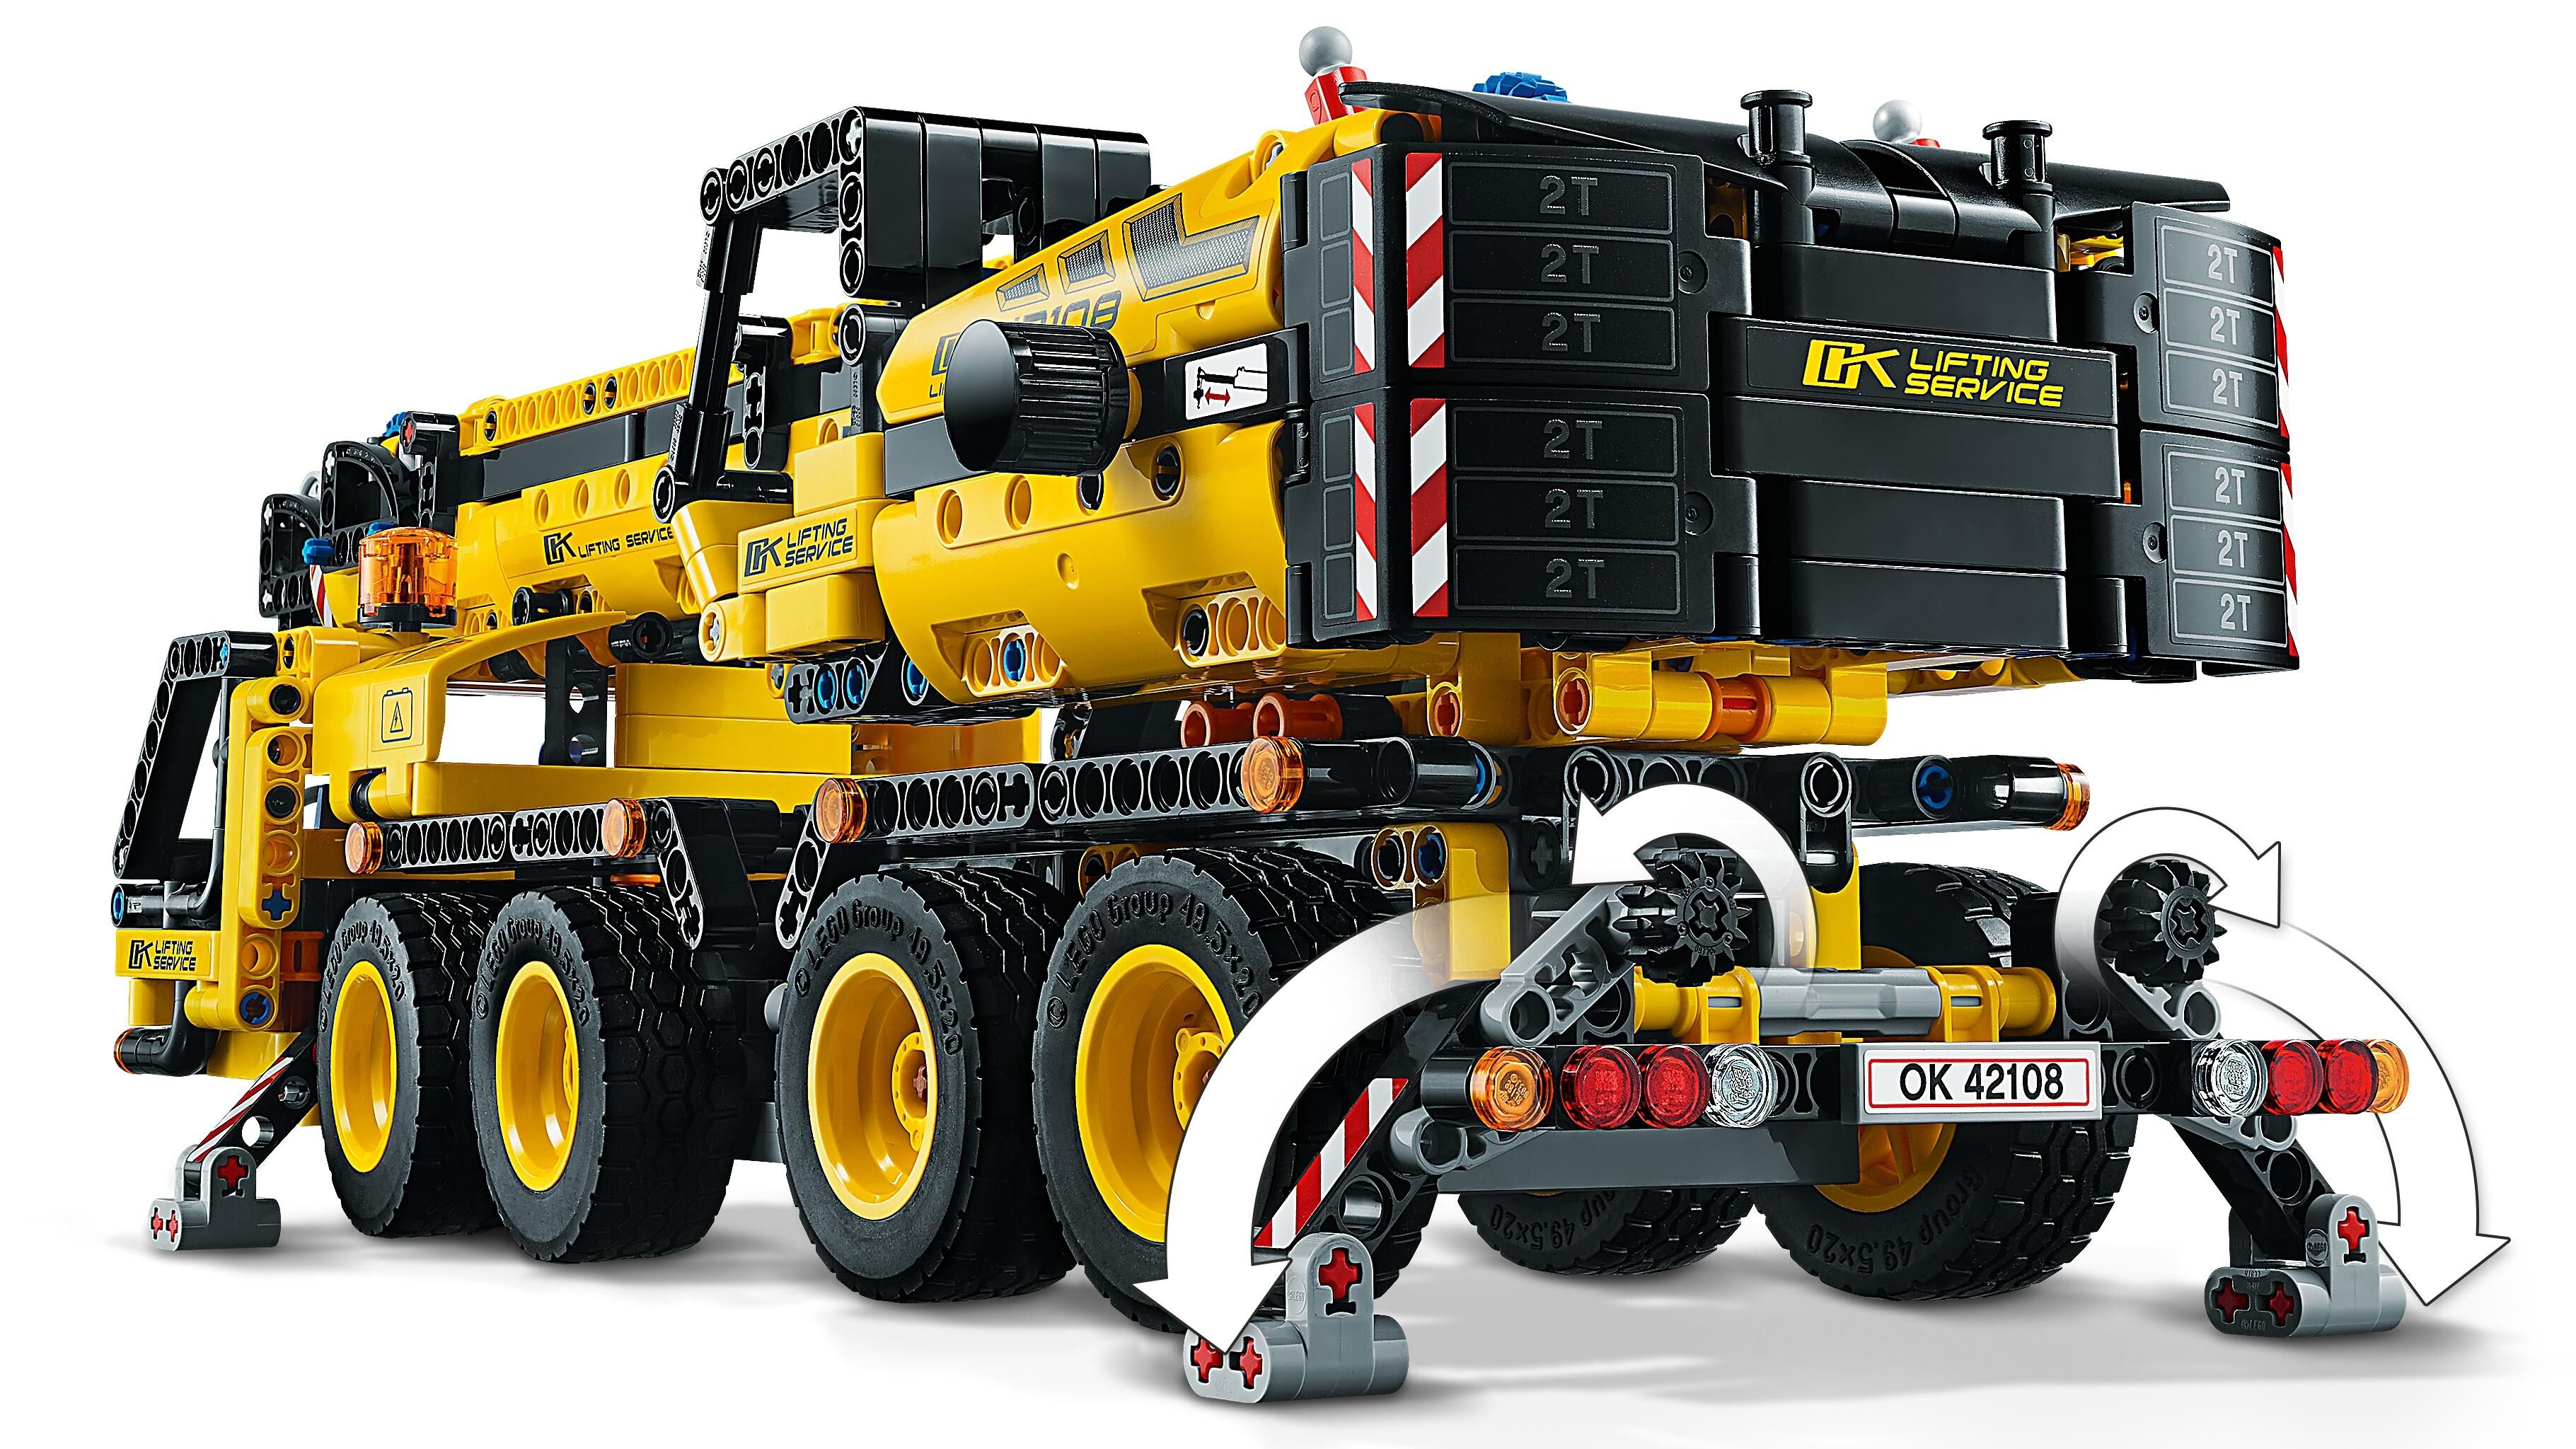  Review Lego Technic #42108 Grue mobile